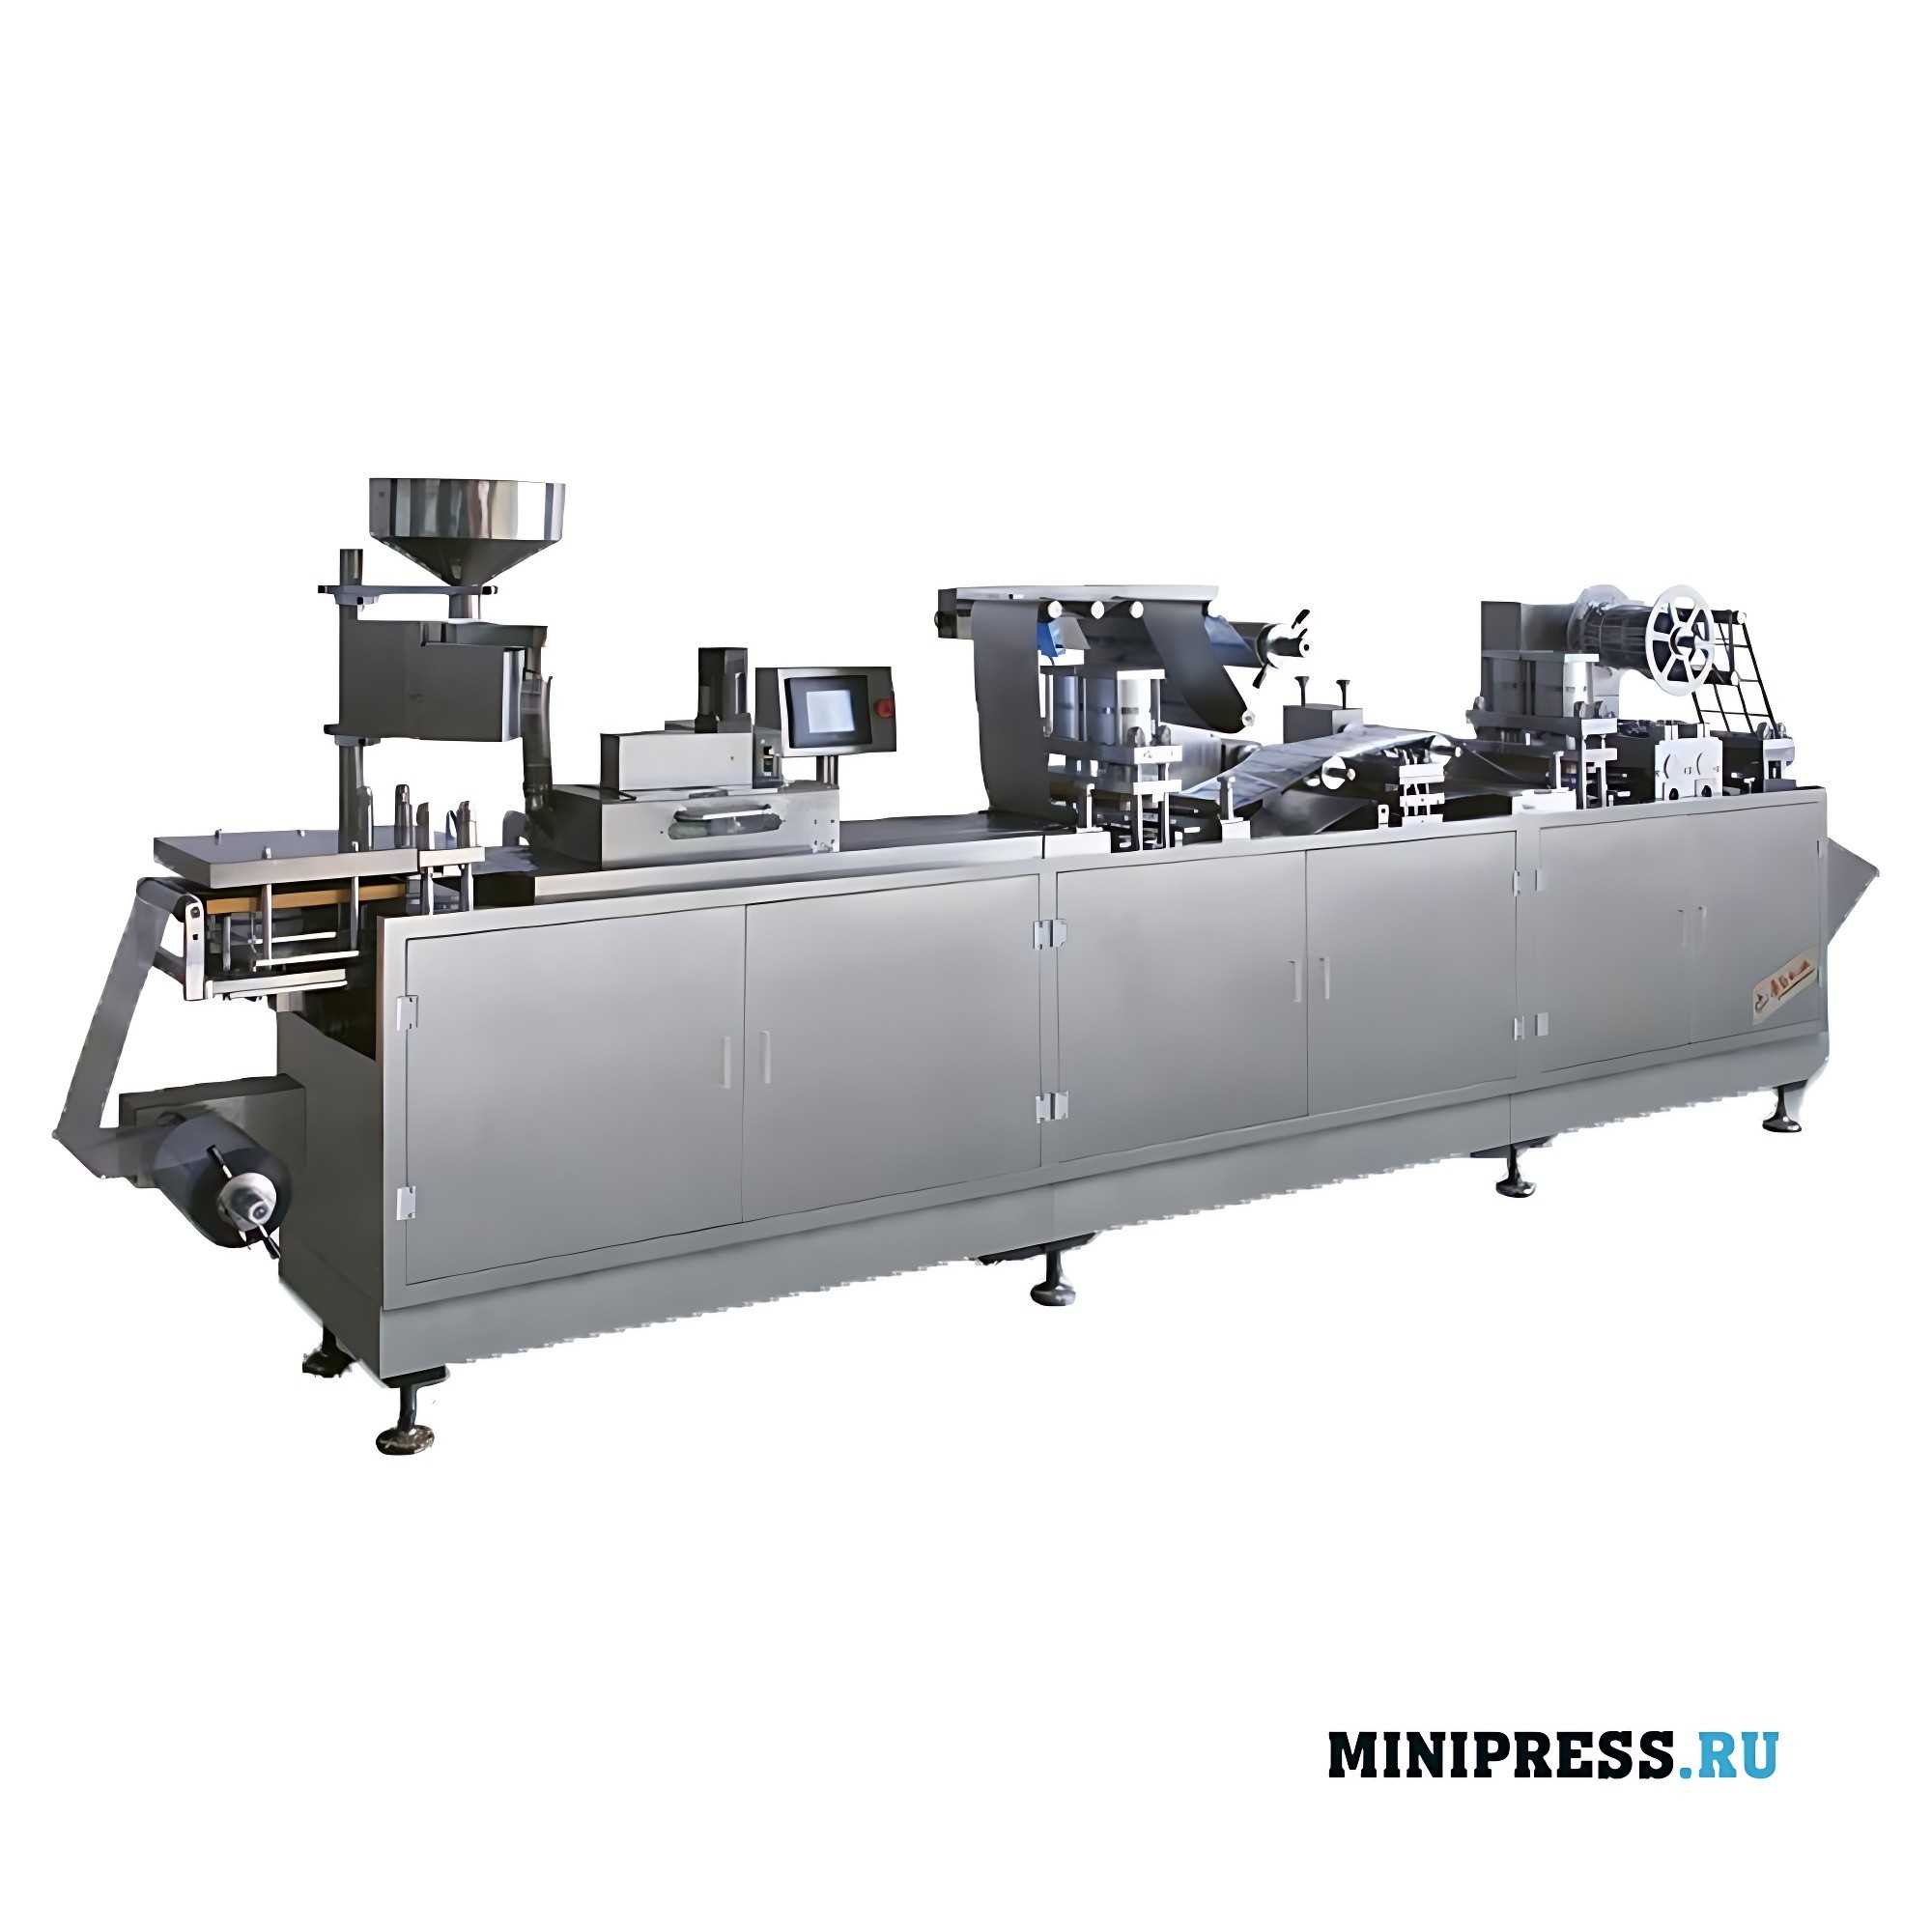 Automatic Packaging Equipment for tight sealing Aluminum/Plastic HMR 17